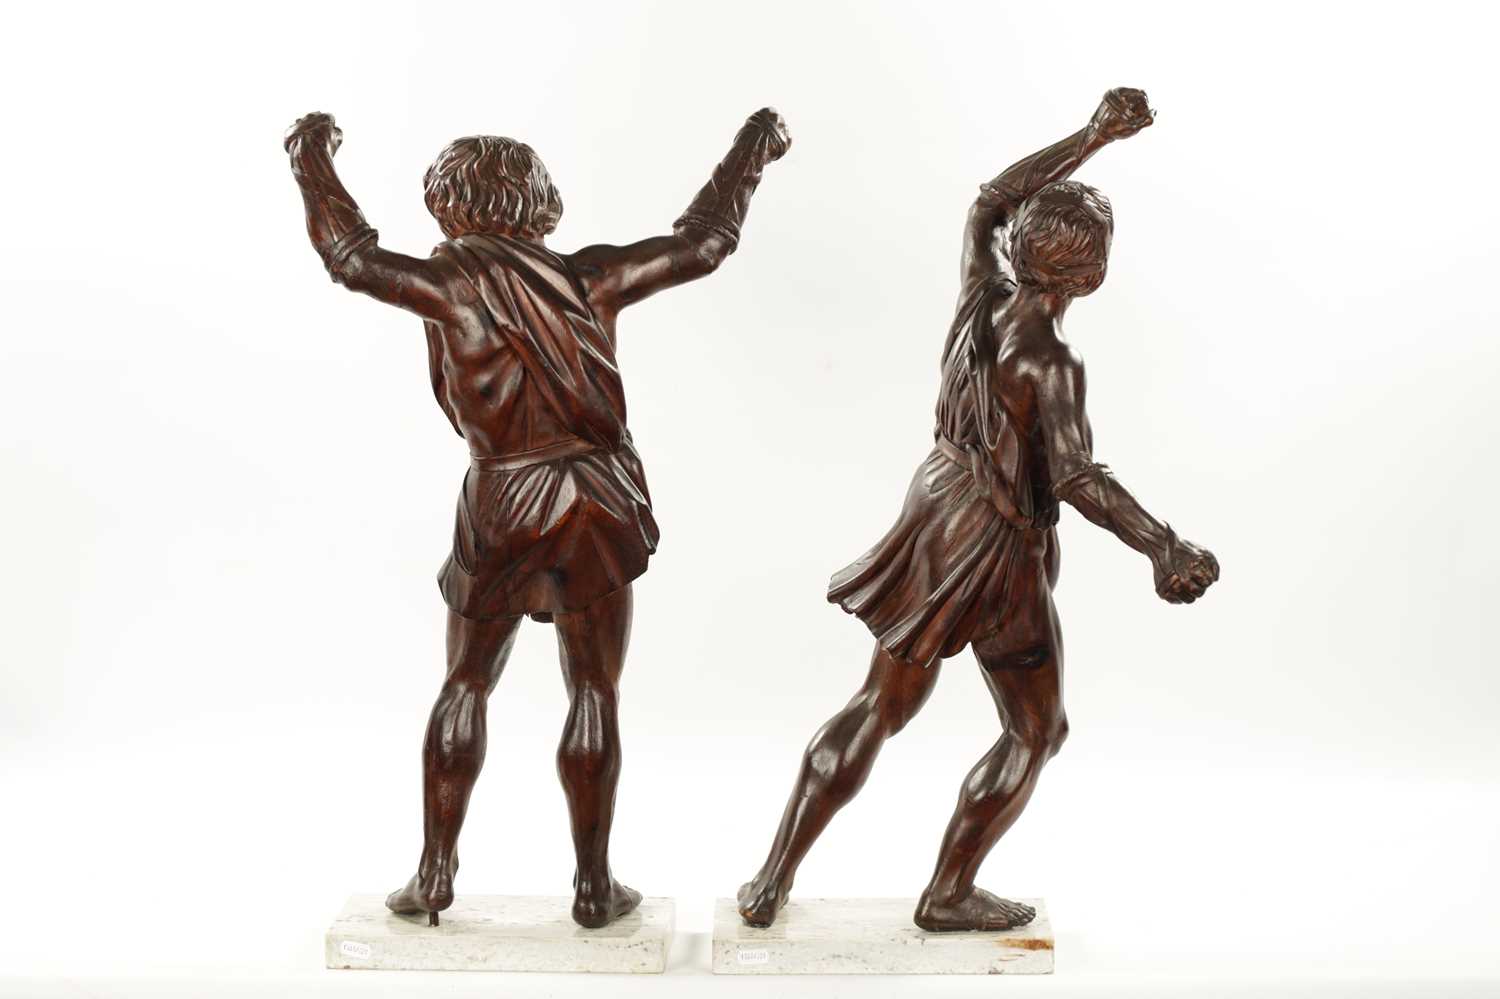 A PAIR OF GRAND TOUR CARVED WALNUT GLADIATORS AFTER THE BORGHESE BRONZE ROMAN FIGURES - Image 10 of 11